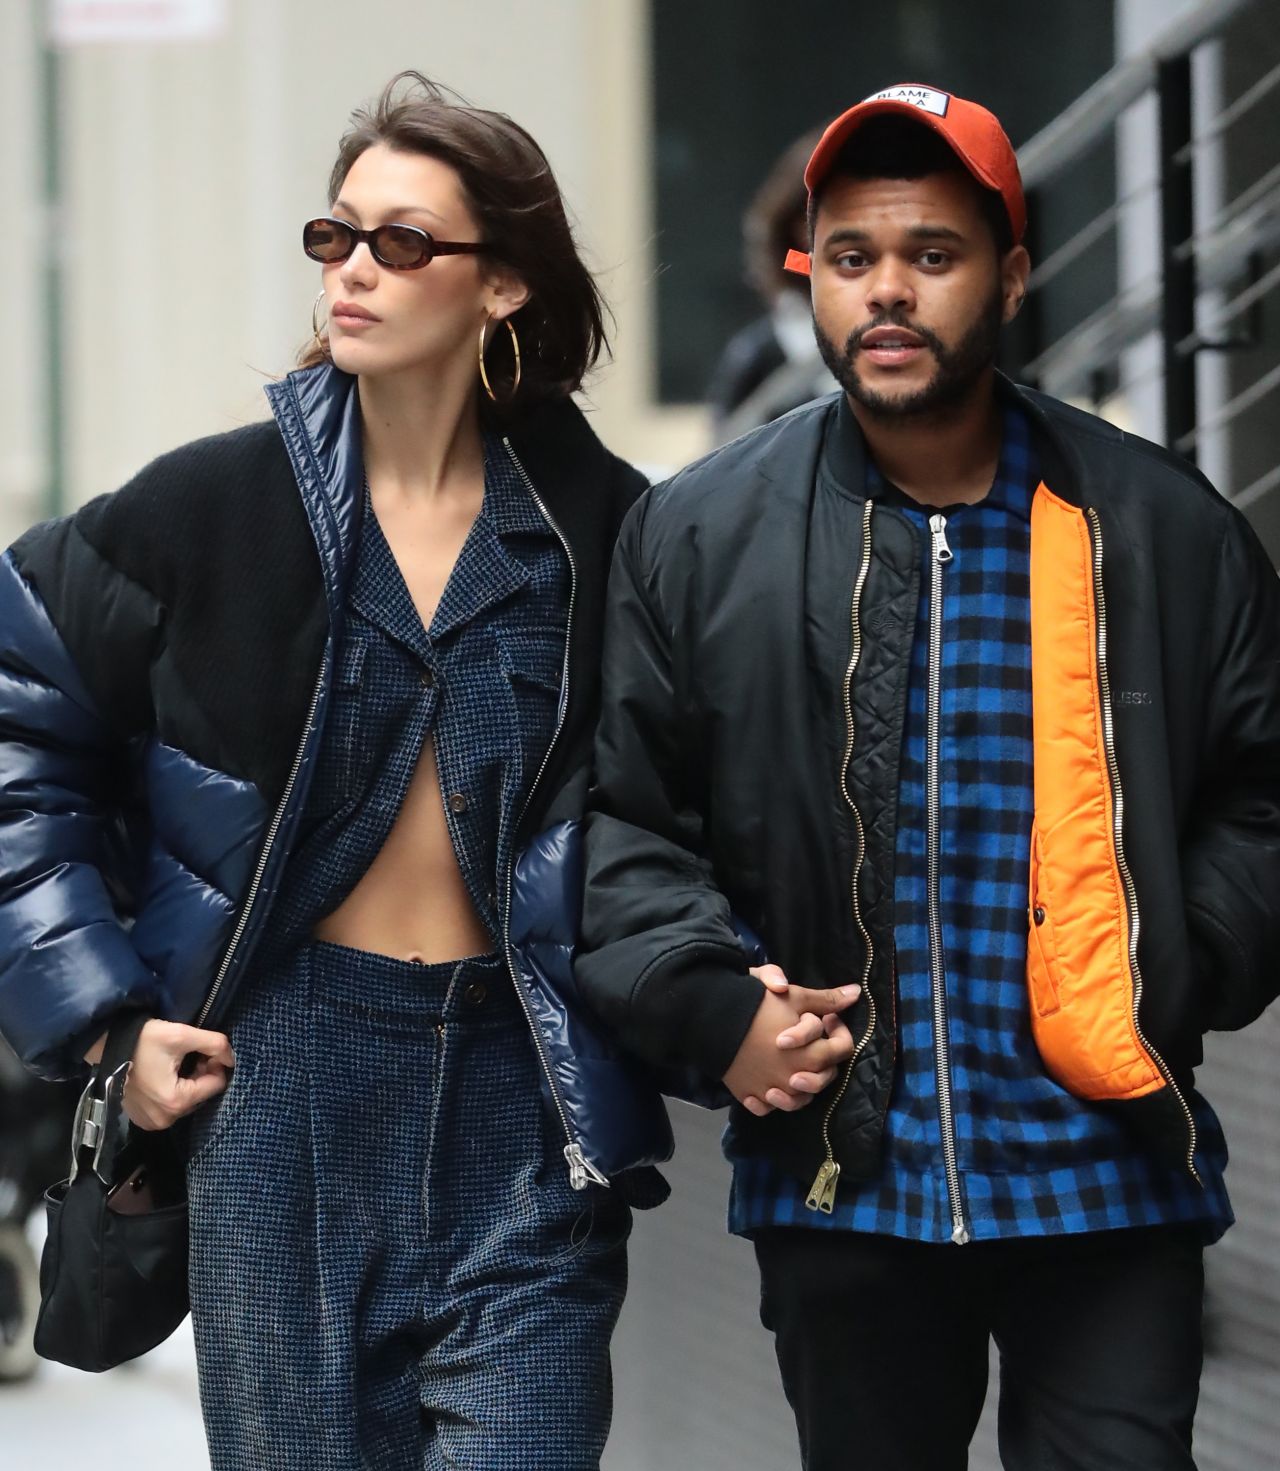 bella-hadid-and-the-weeknd-out-in-new-york-city-10-29-2018-5.jpg